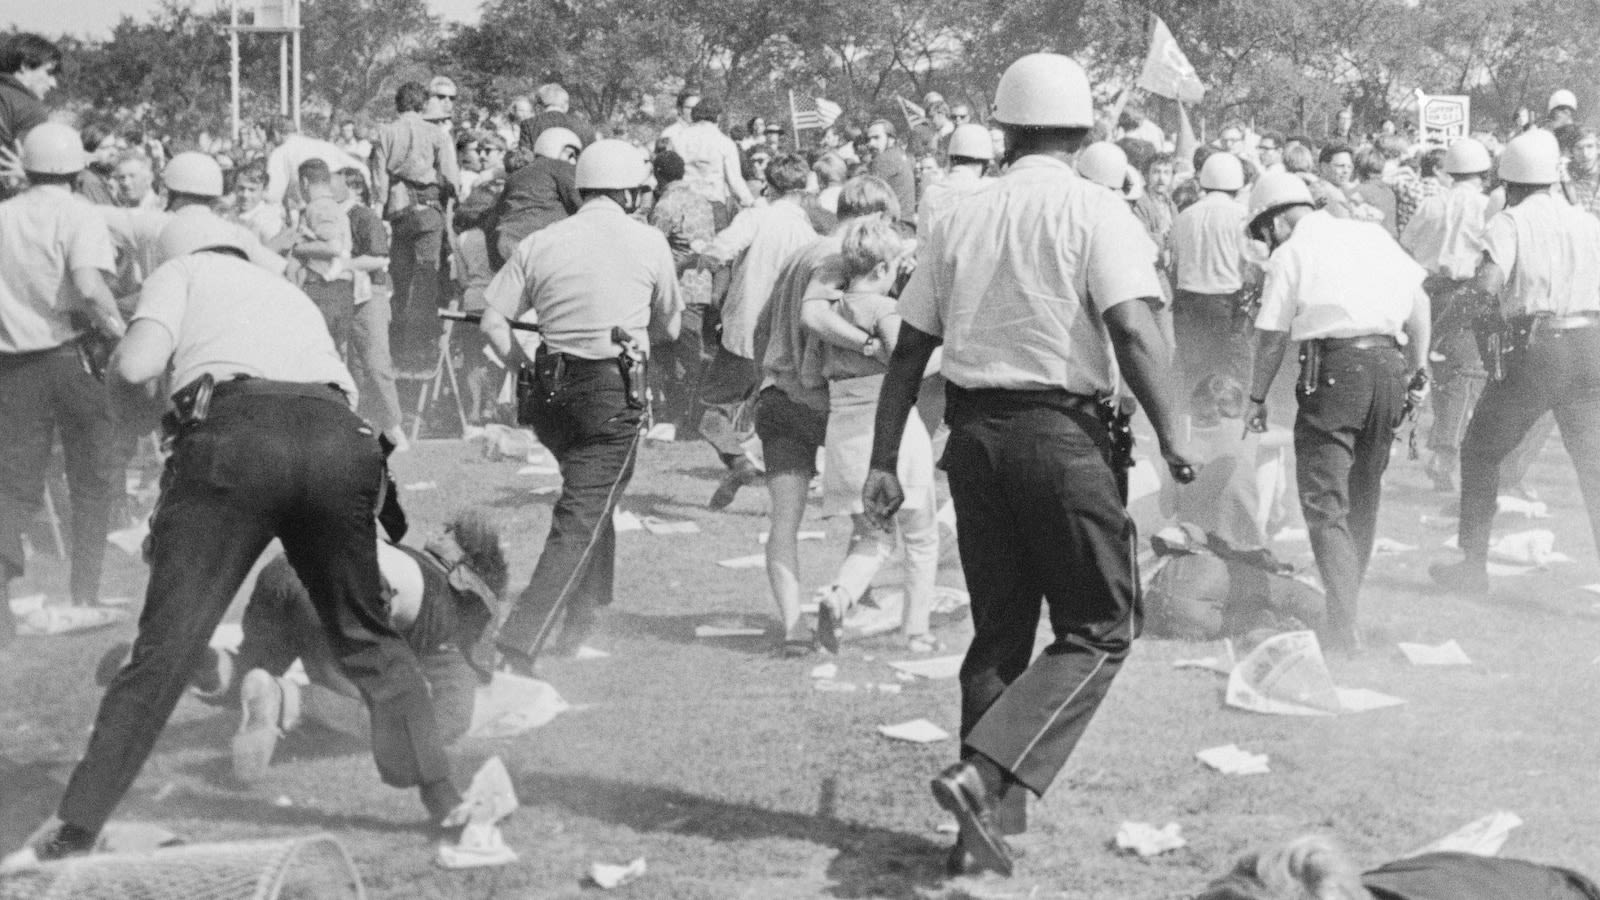 Democrats work to keep protests from disrupting Chicago convention, with concerns over parallels to 1968